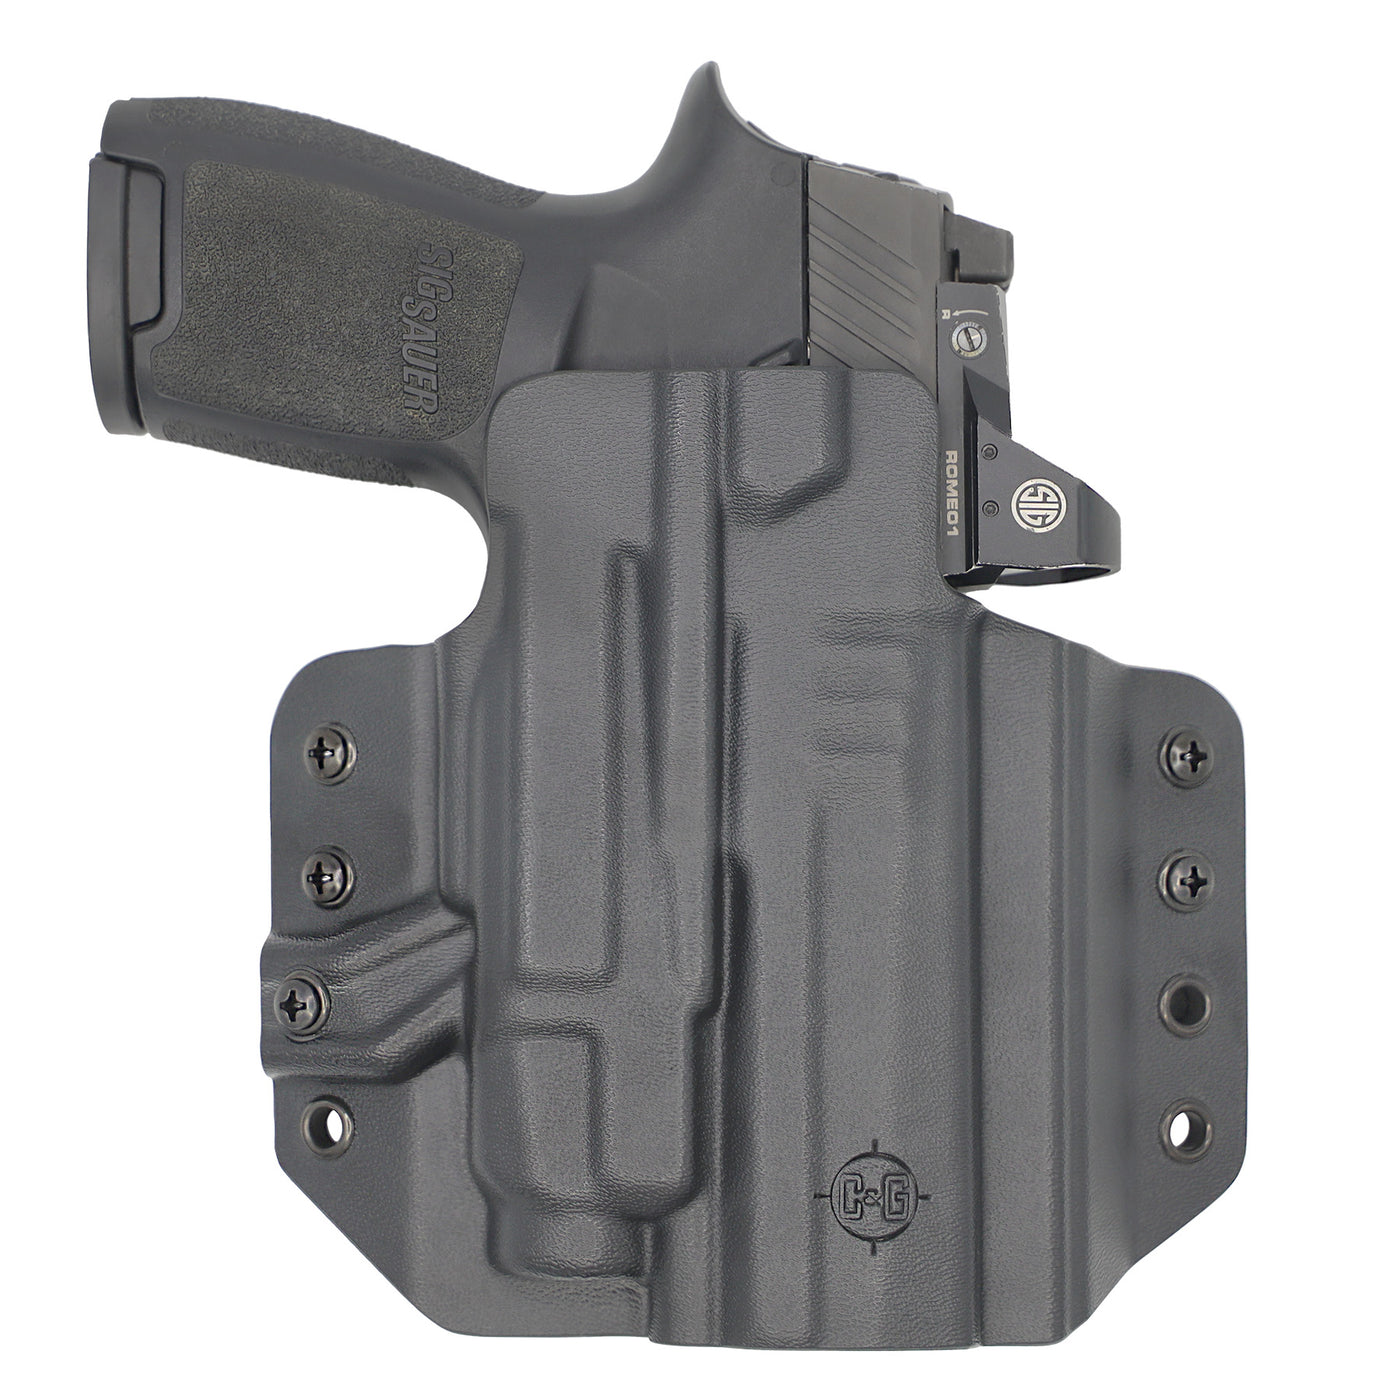 C&G Holsters Quickship OWB Tactical SIG P320c Streamlight TLR7 in holstered position